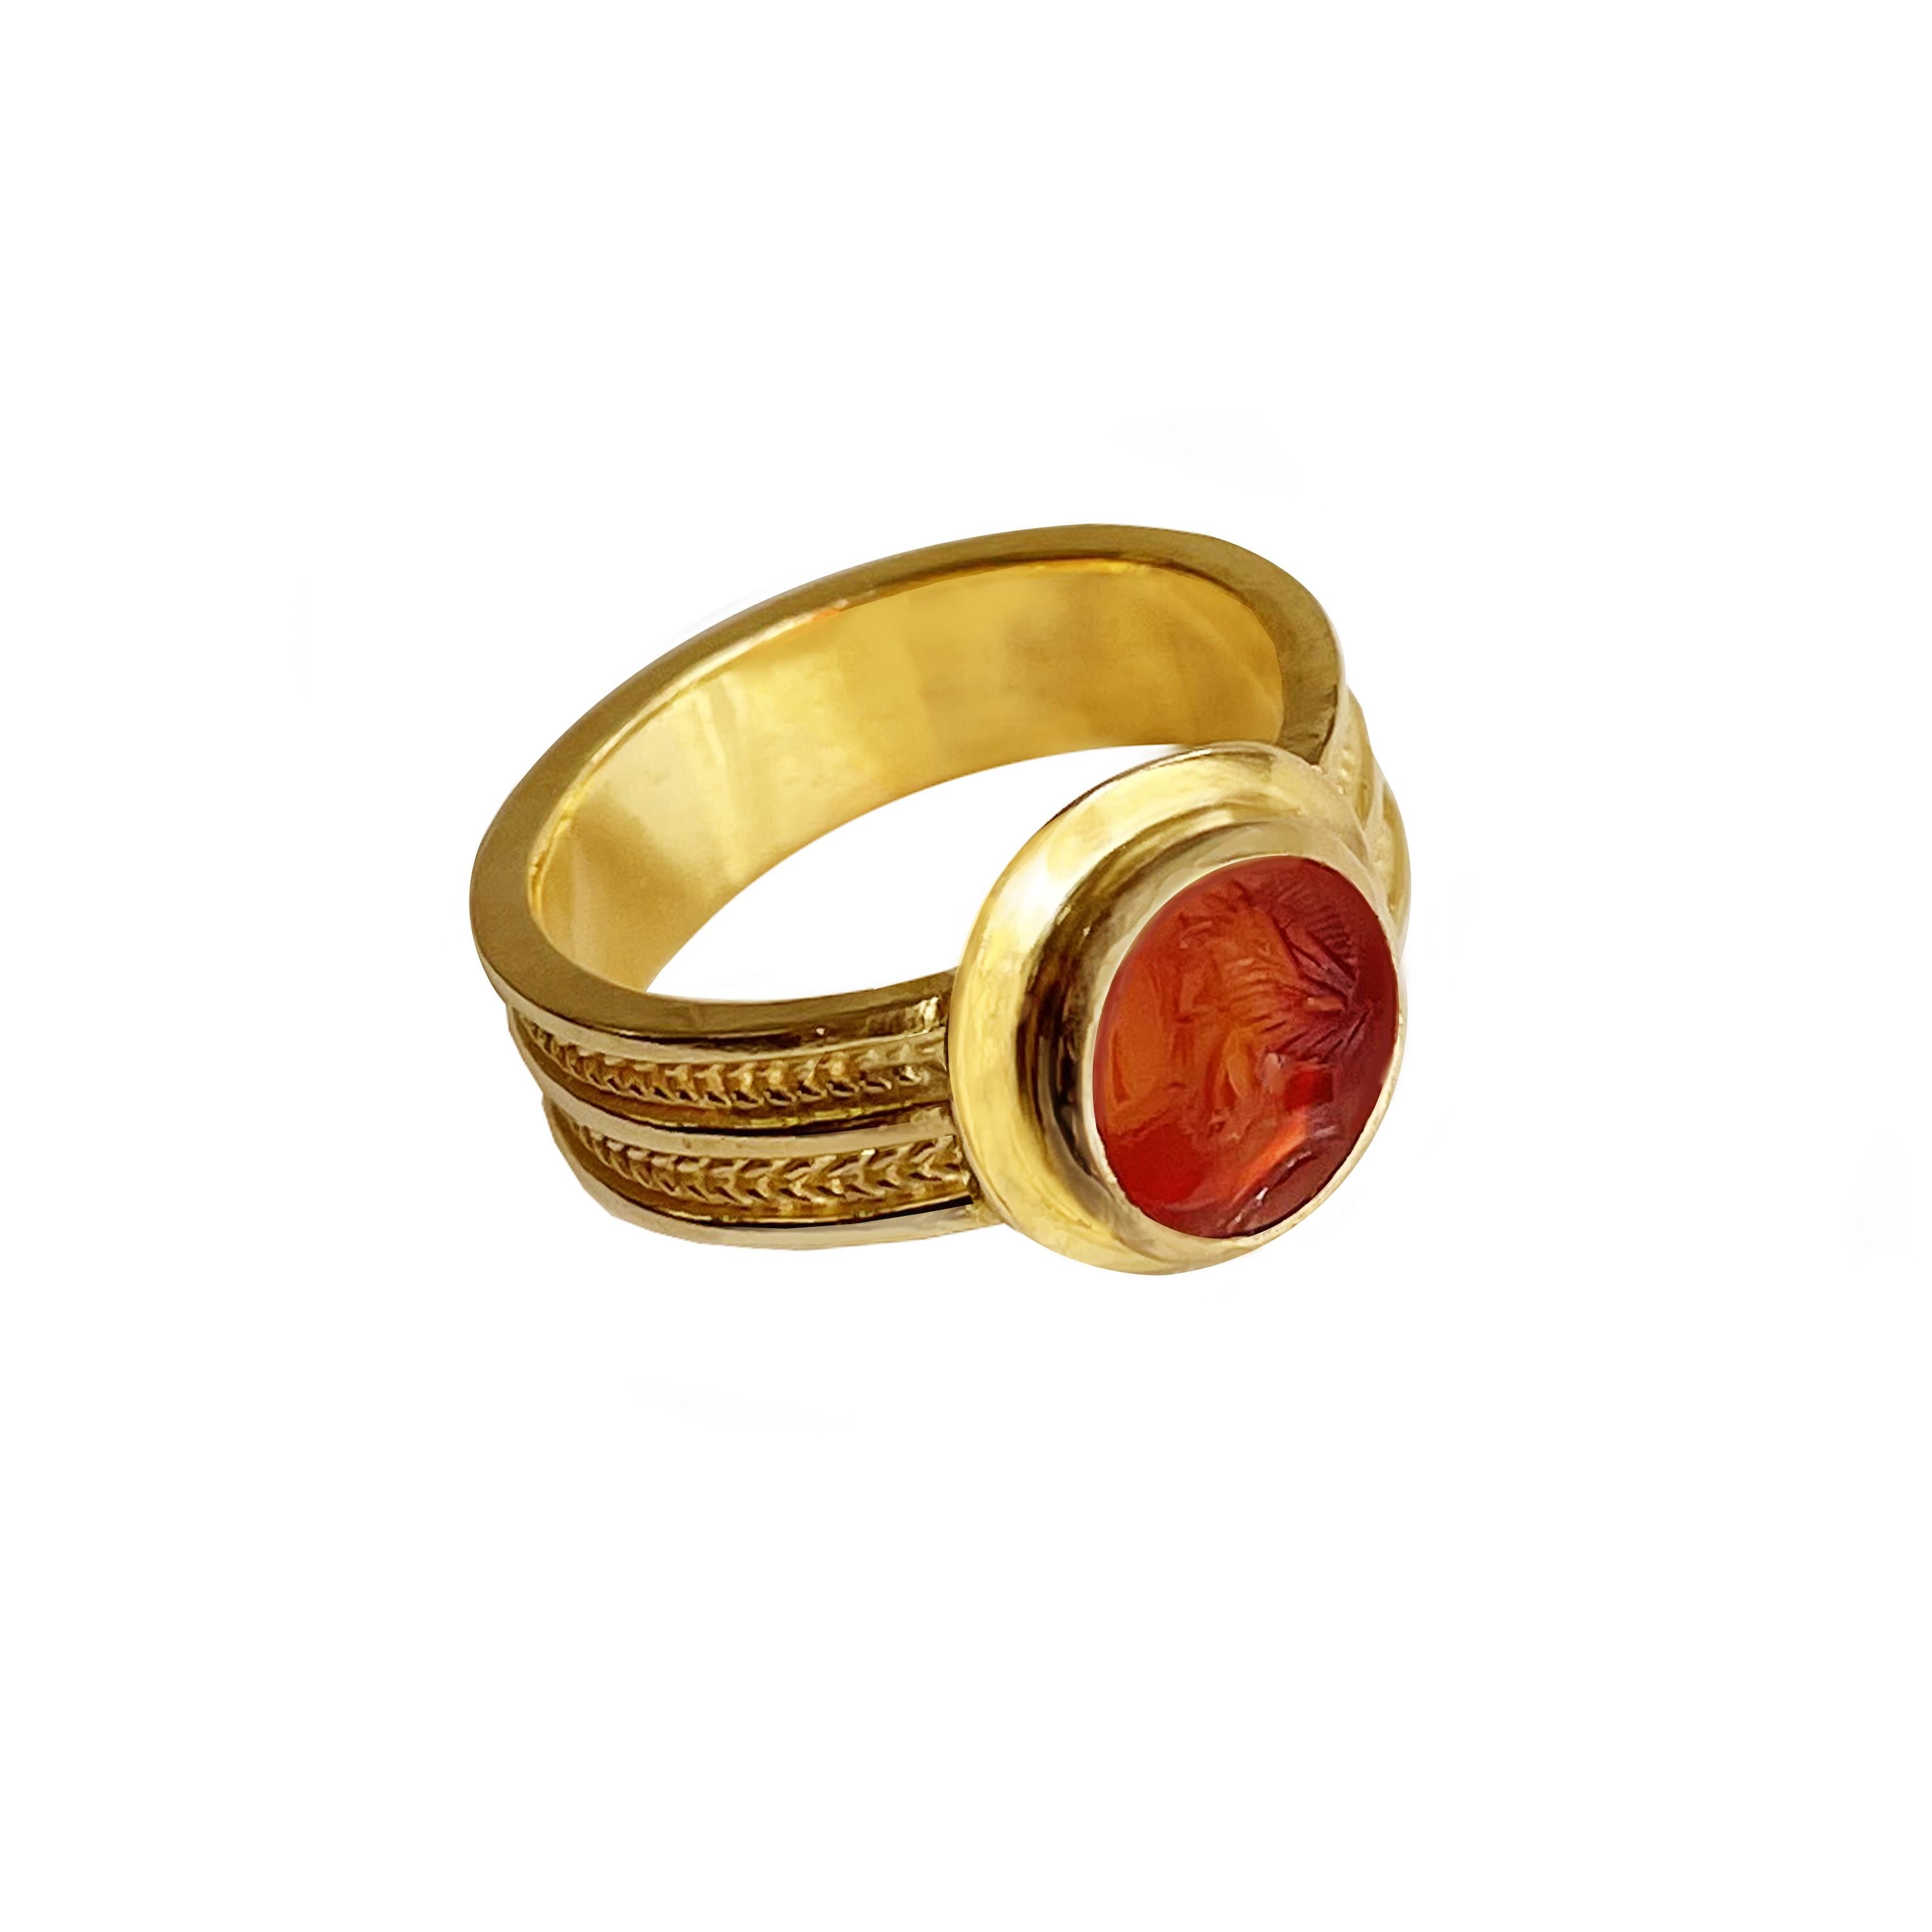 In this amazing ring handmade by our goldsmiths in 18 Kt gold  is set an authentic Roman carnelian intaglio (1st-2nd cent AD) depicting the head of the God Apollo.
Apollo was considered the standard of male beauty ! He was the son of Zeus and Leto.